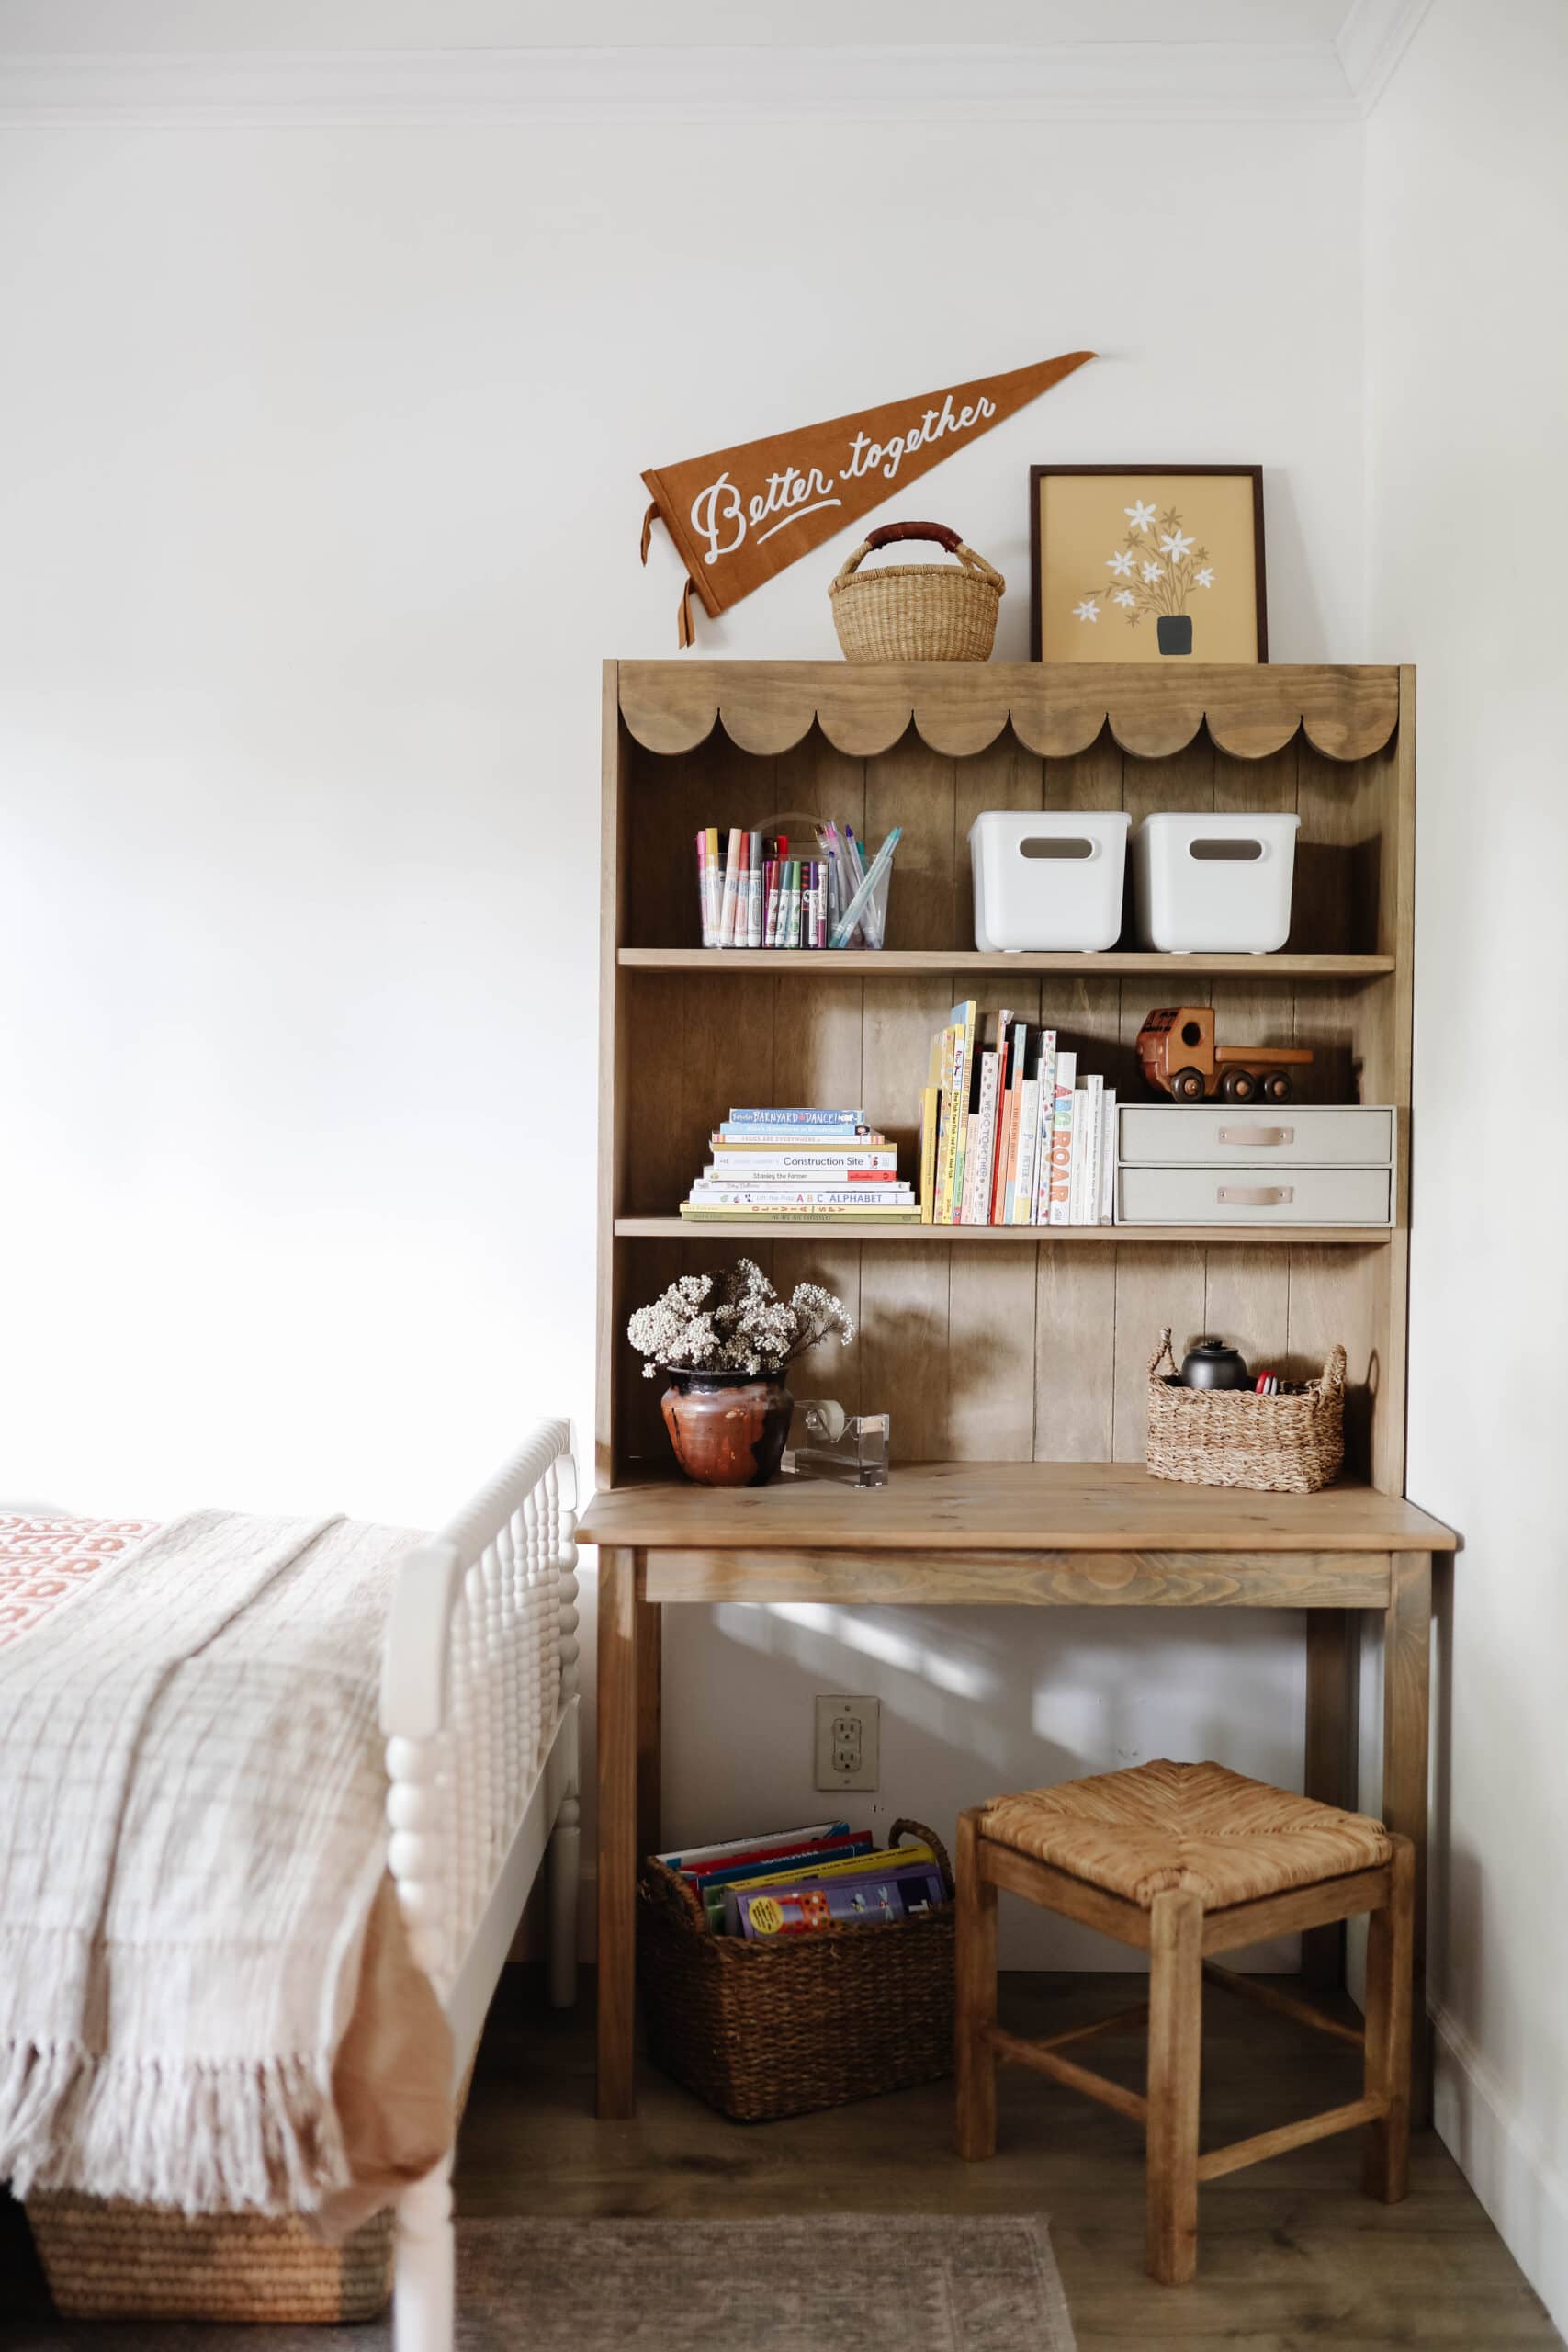 An Ikea Hack Shared Desk with Storage for the Kids Room